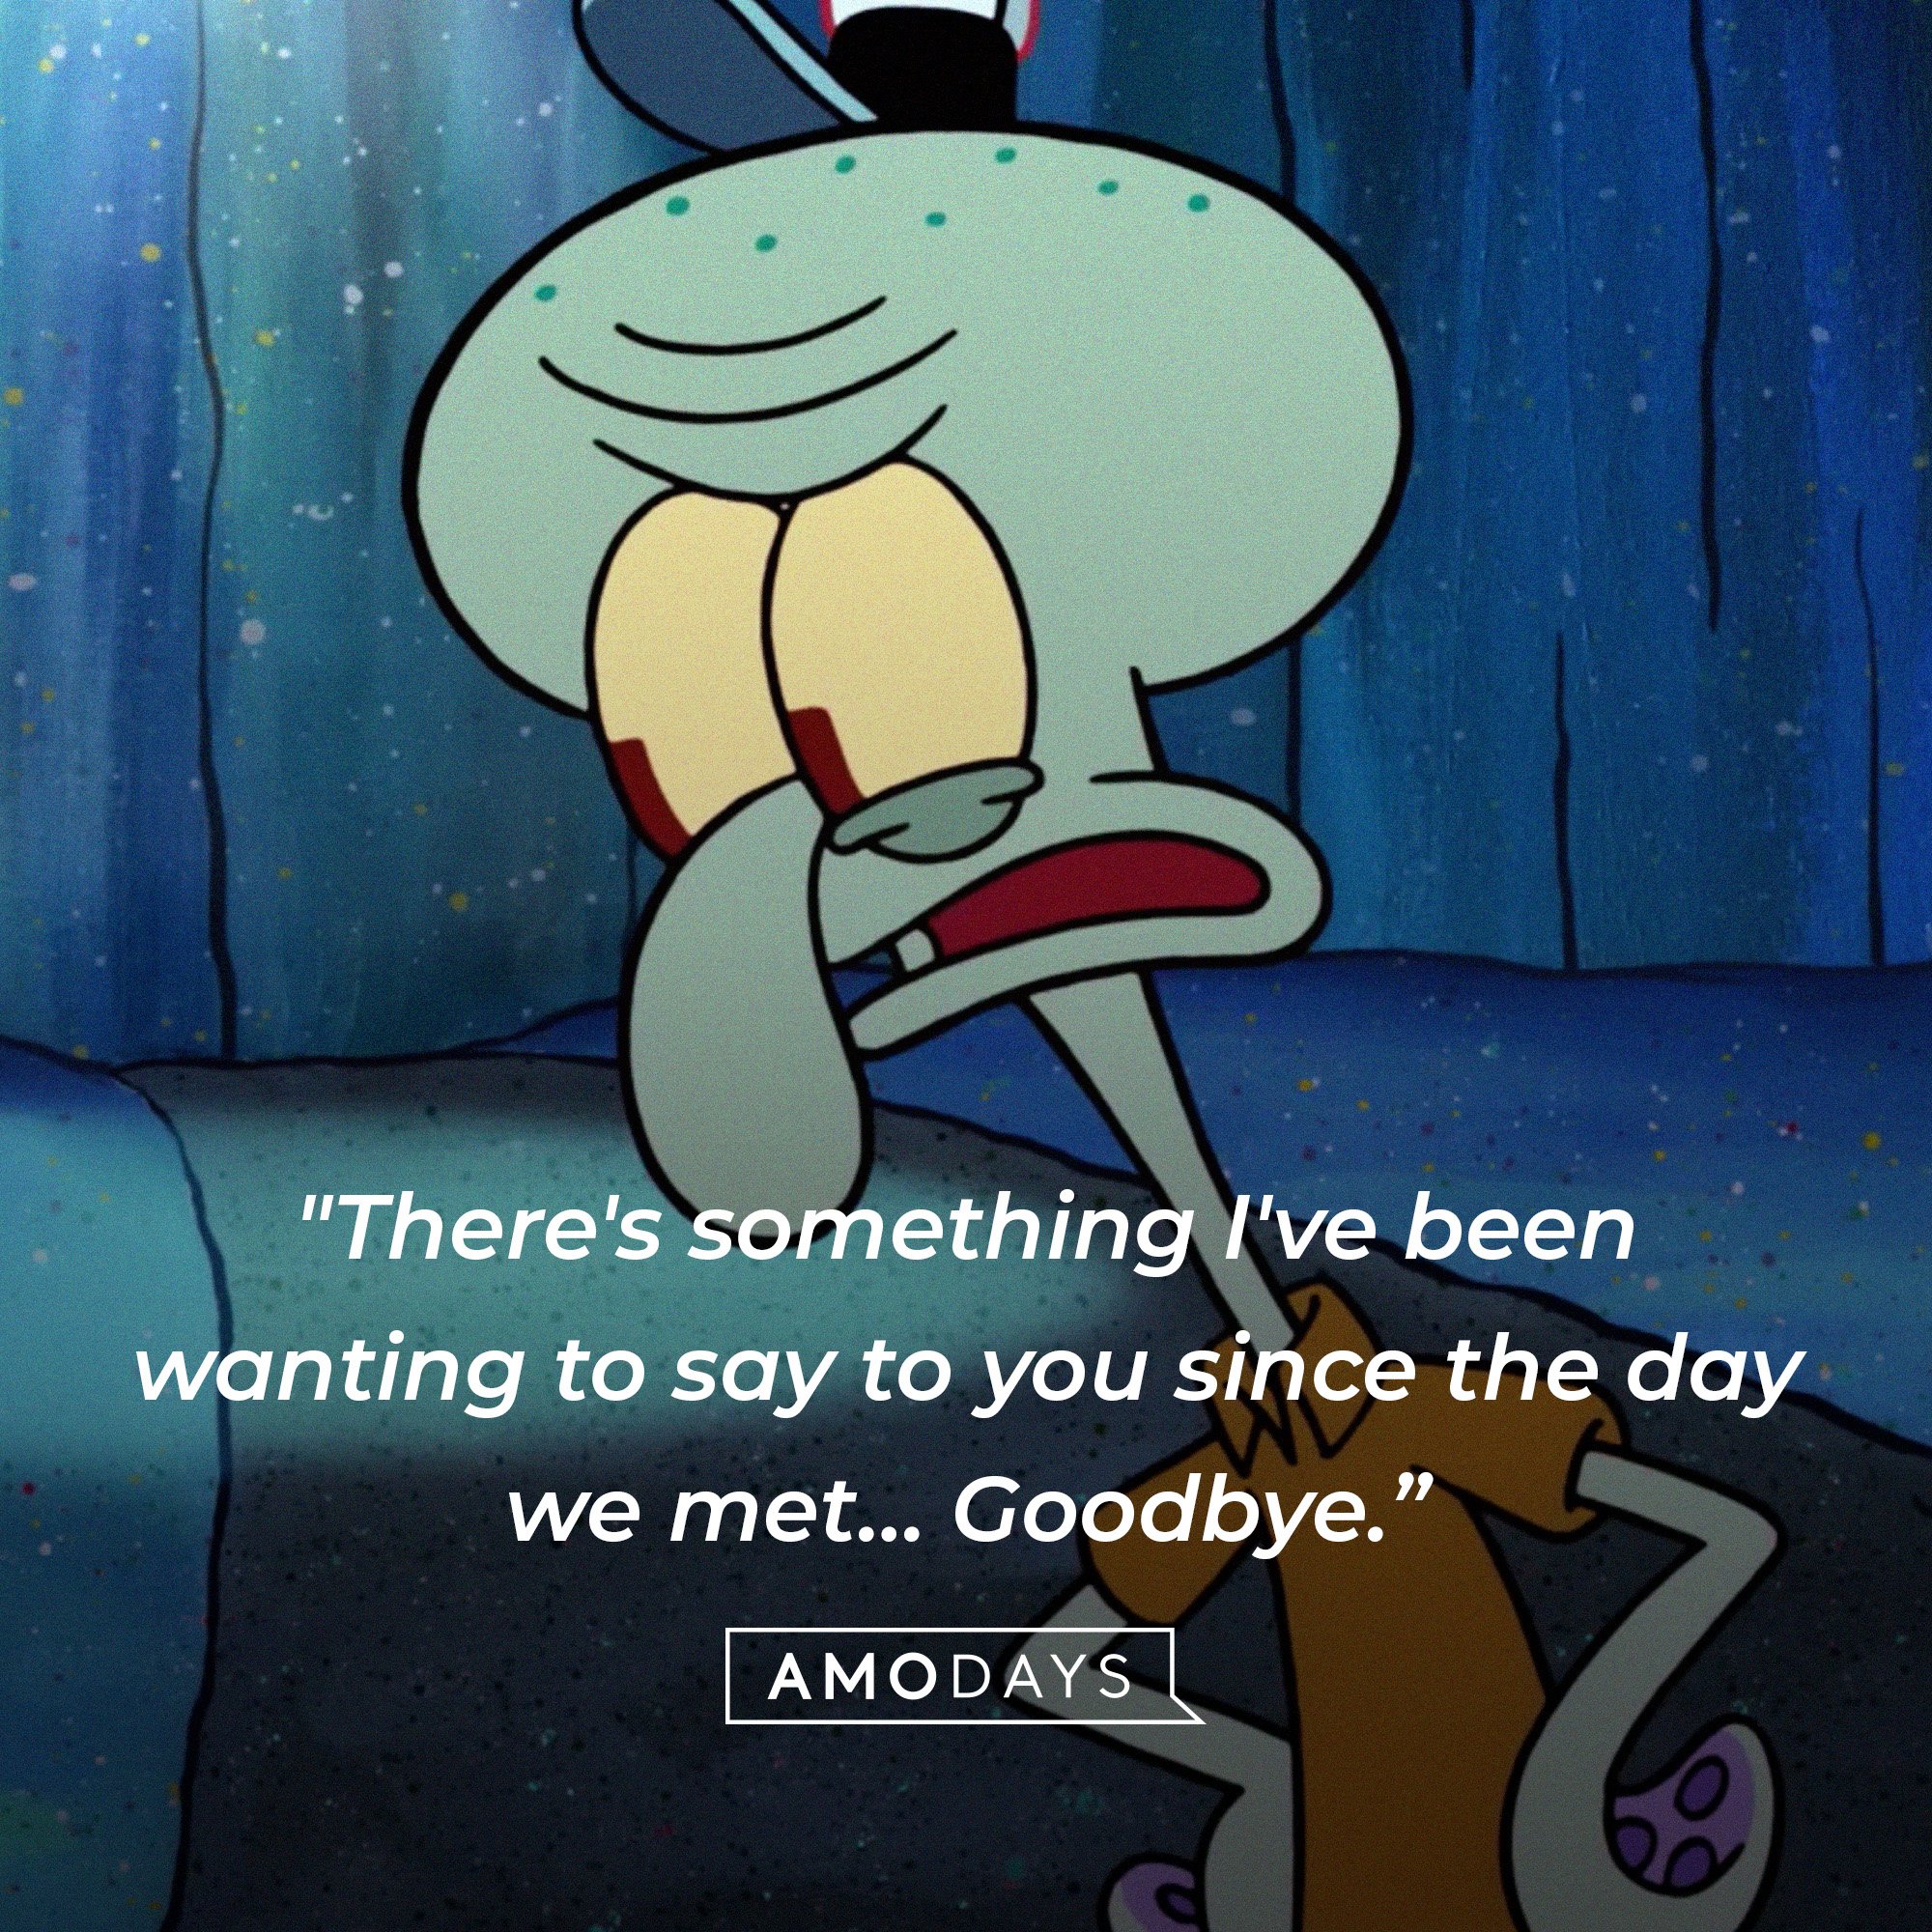 Squidward Tentacles’ quote: "There's something I've been wanting to say to you since the day we met… Goodbye.” | Source: AmoDays